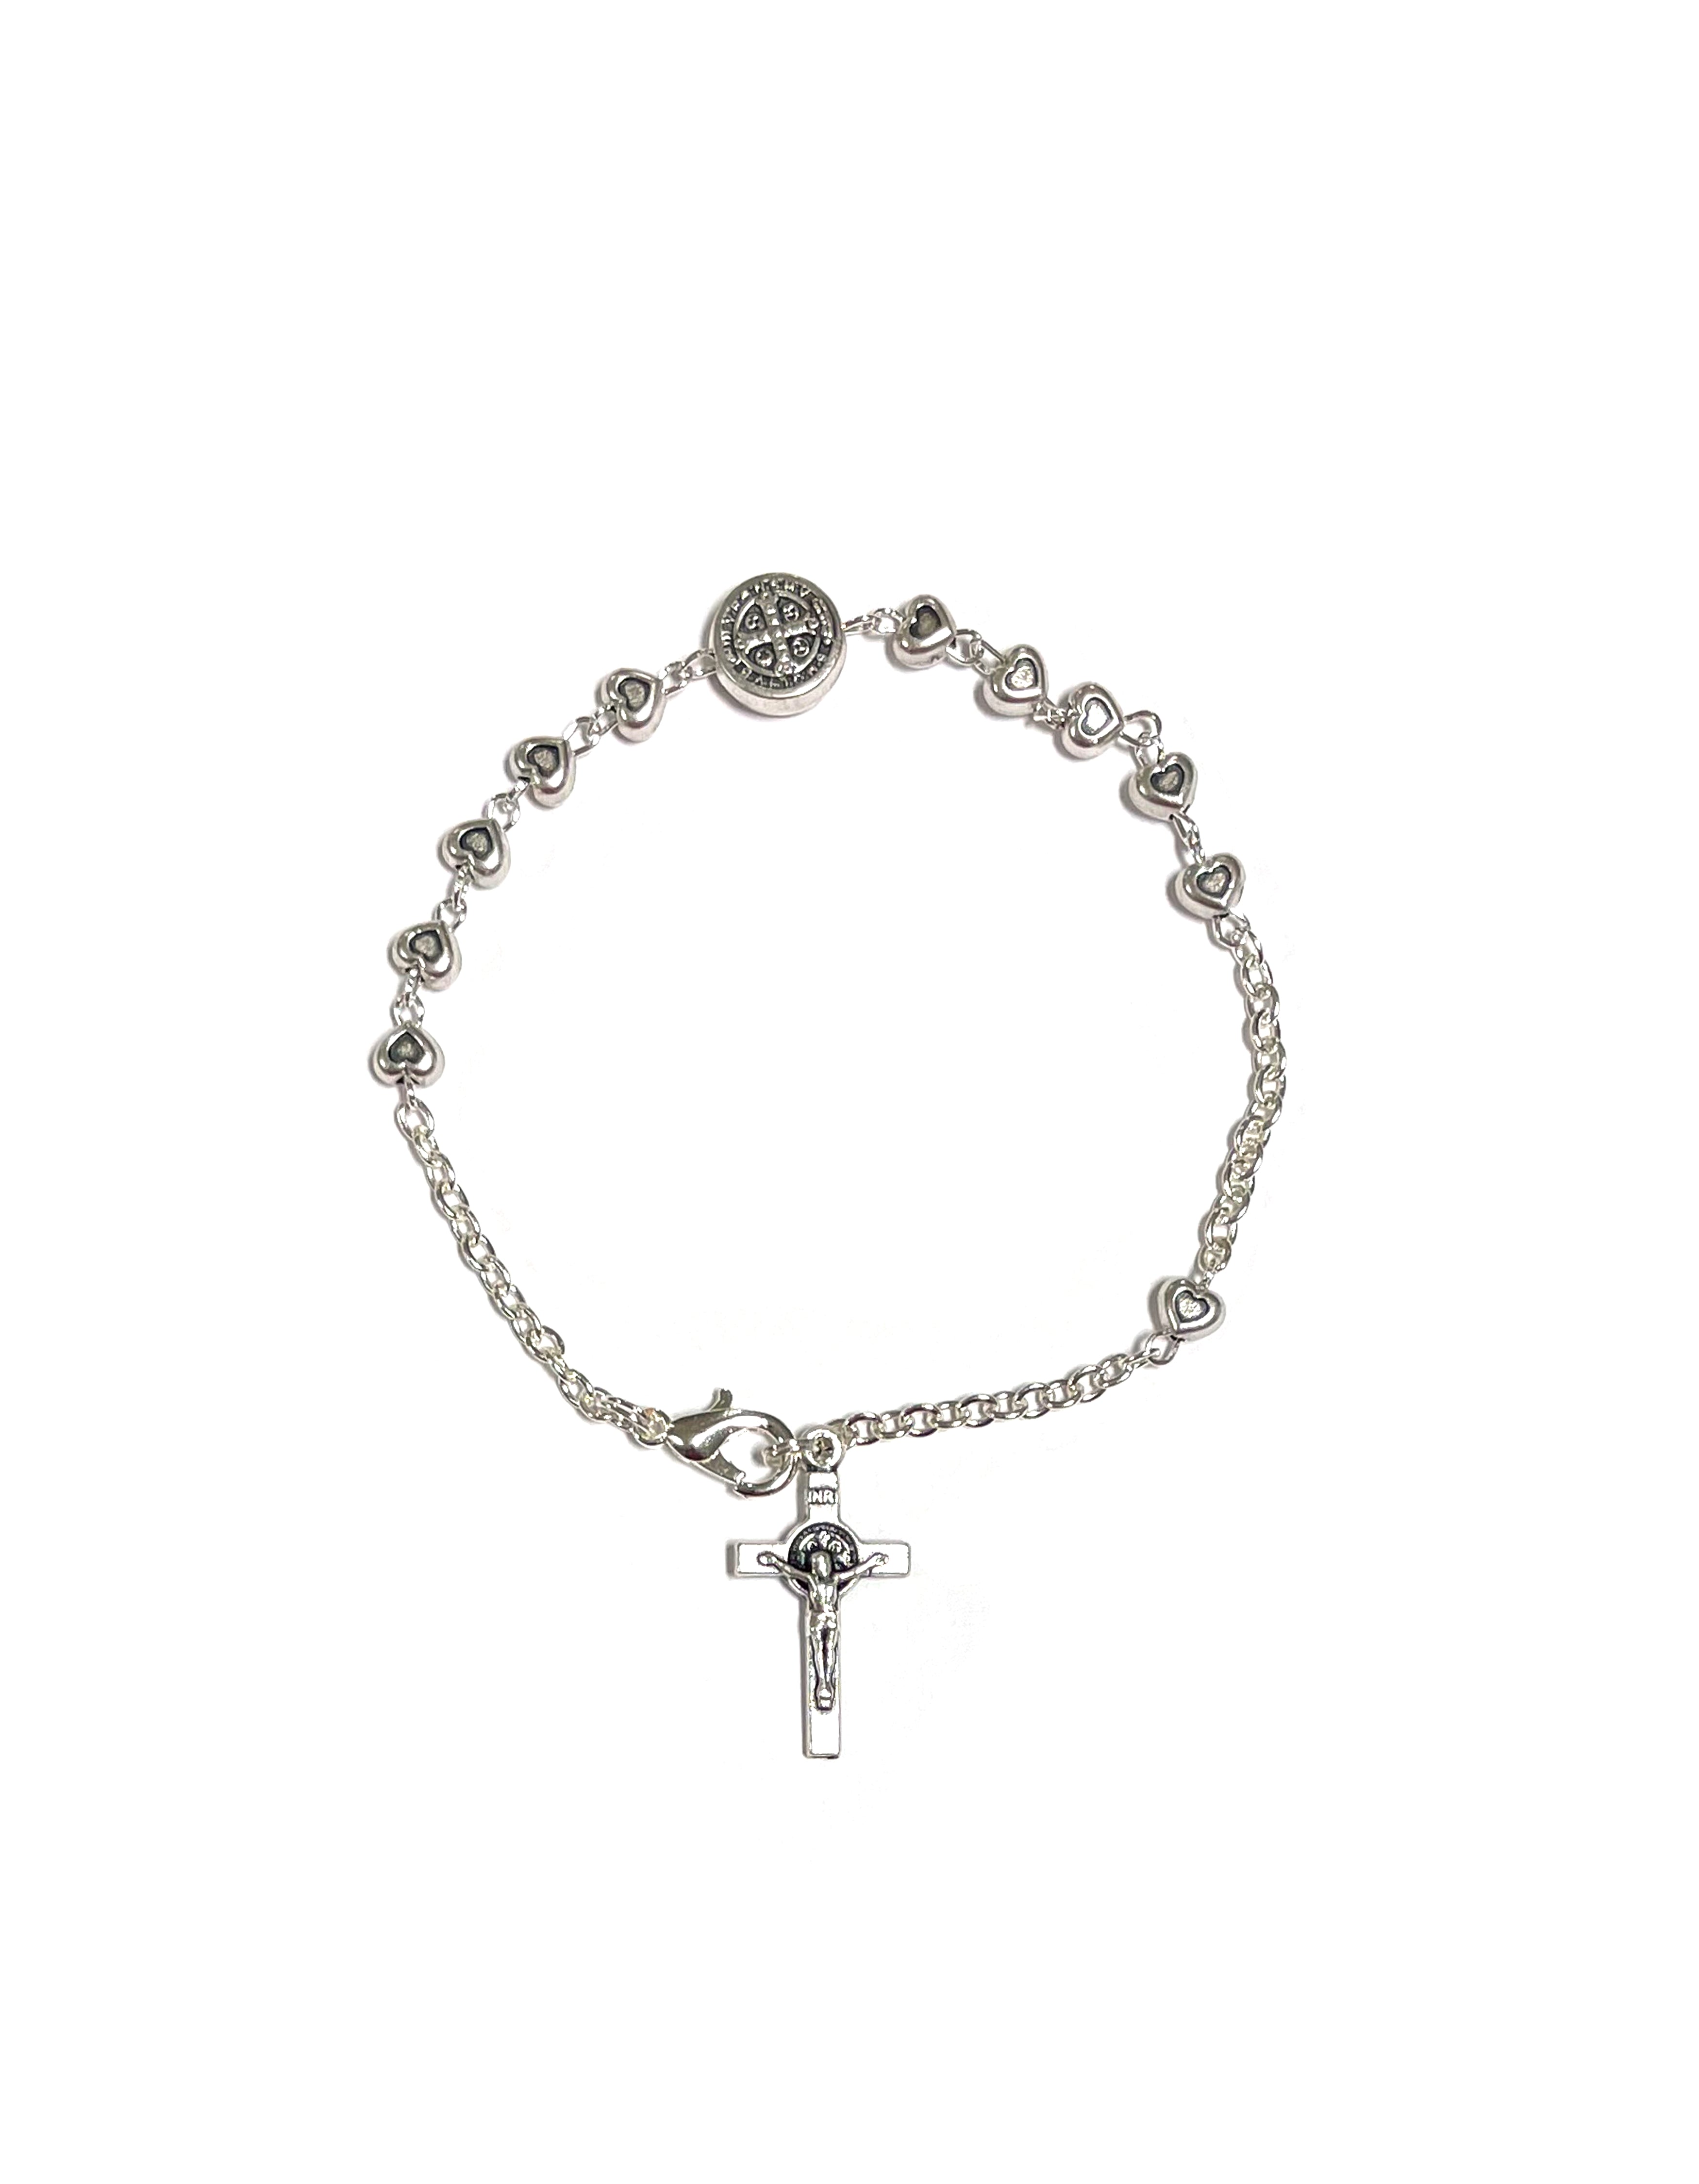 Oxidized silver Saint Benedict bracelet with heart-shaped beads